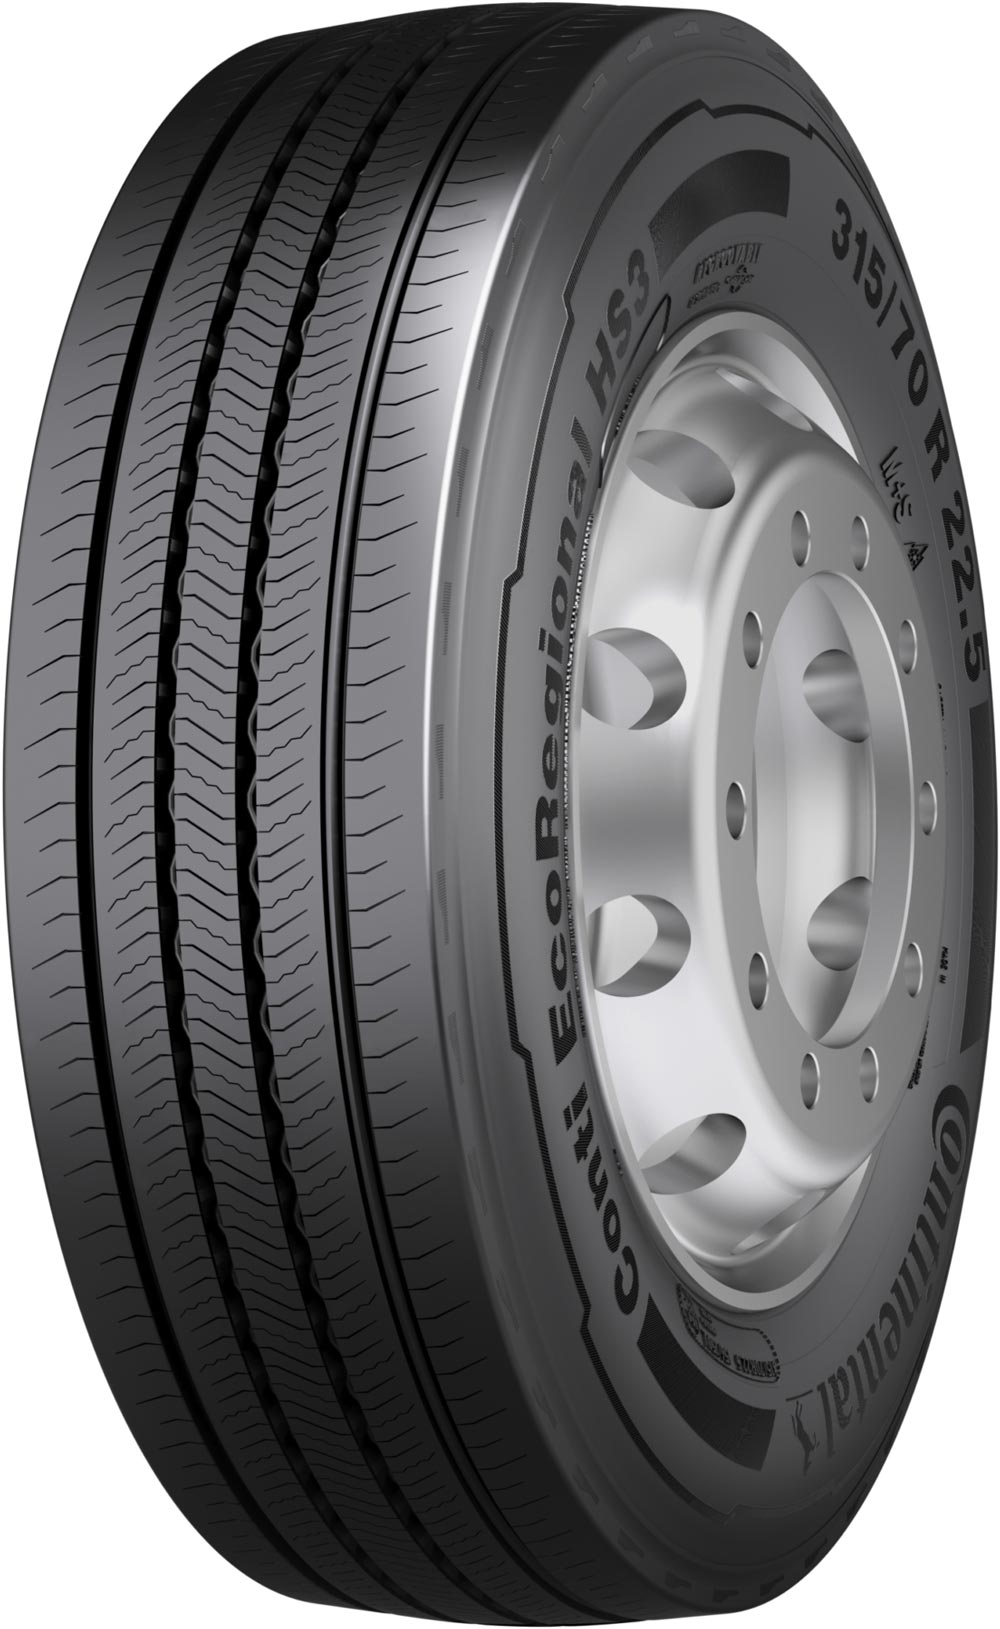 product_type-heavy_tires CONTINENTAL ContiEcoRegional HS3 20PR 385/65 R22.5 K